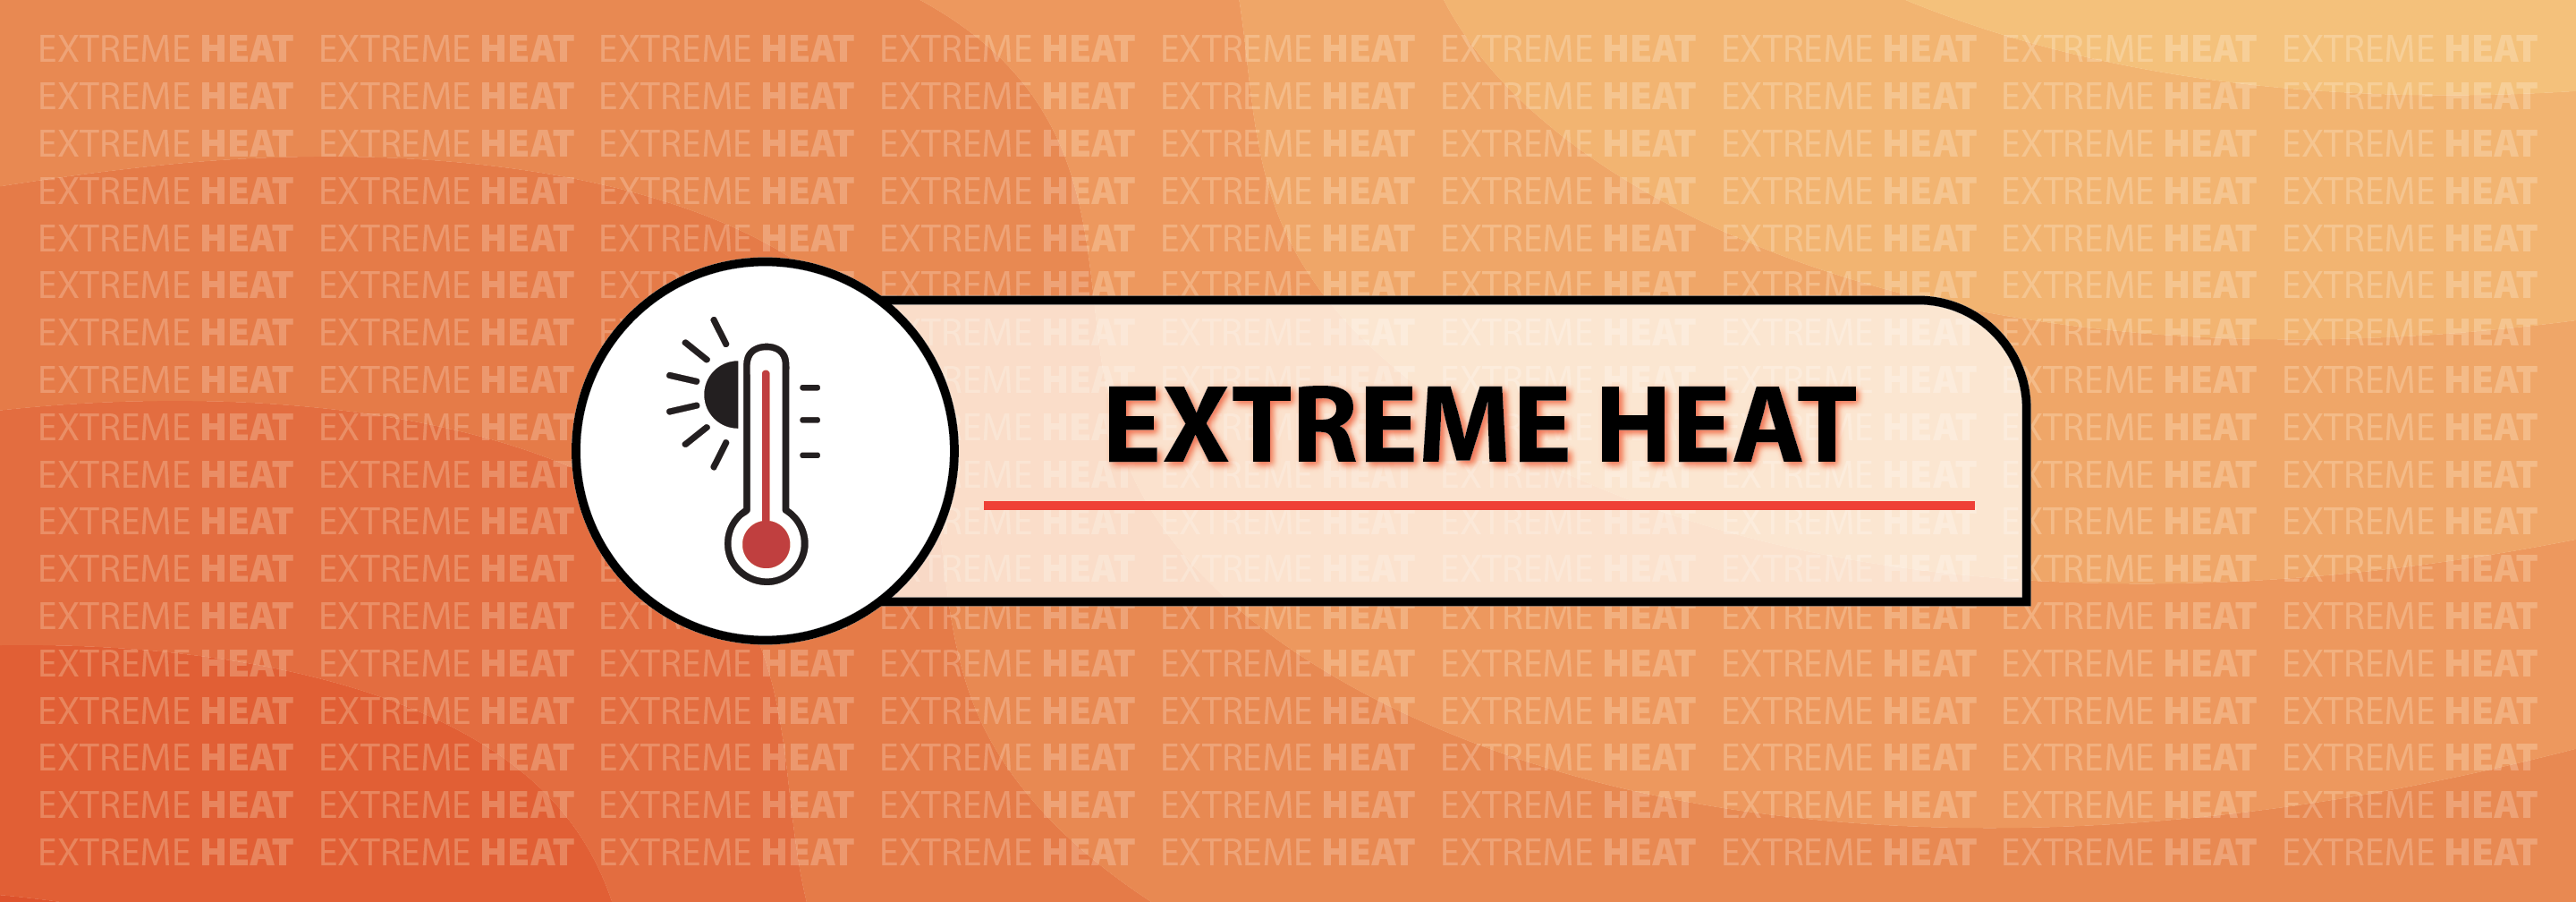 A banner image with the text Extreme Heat